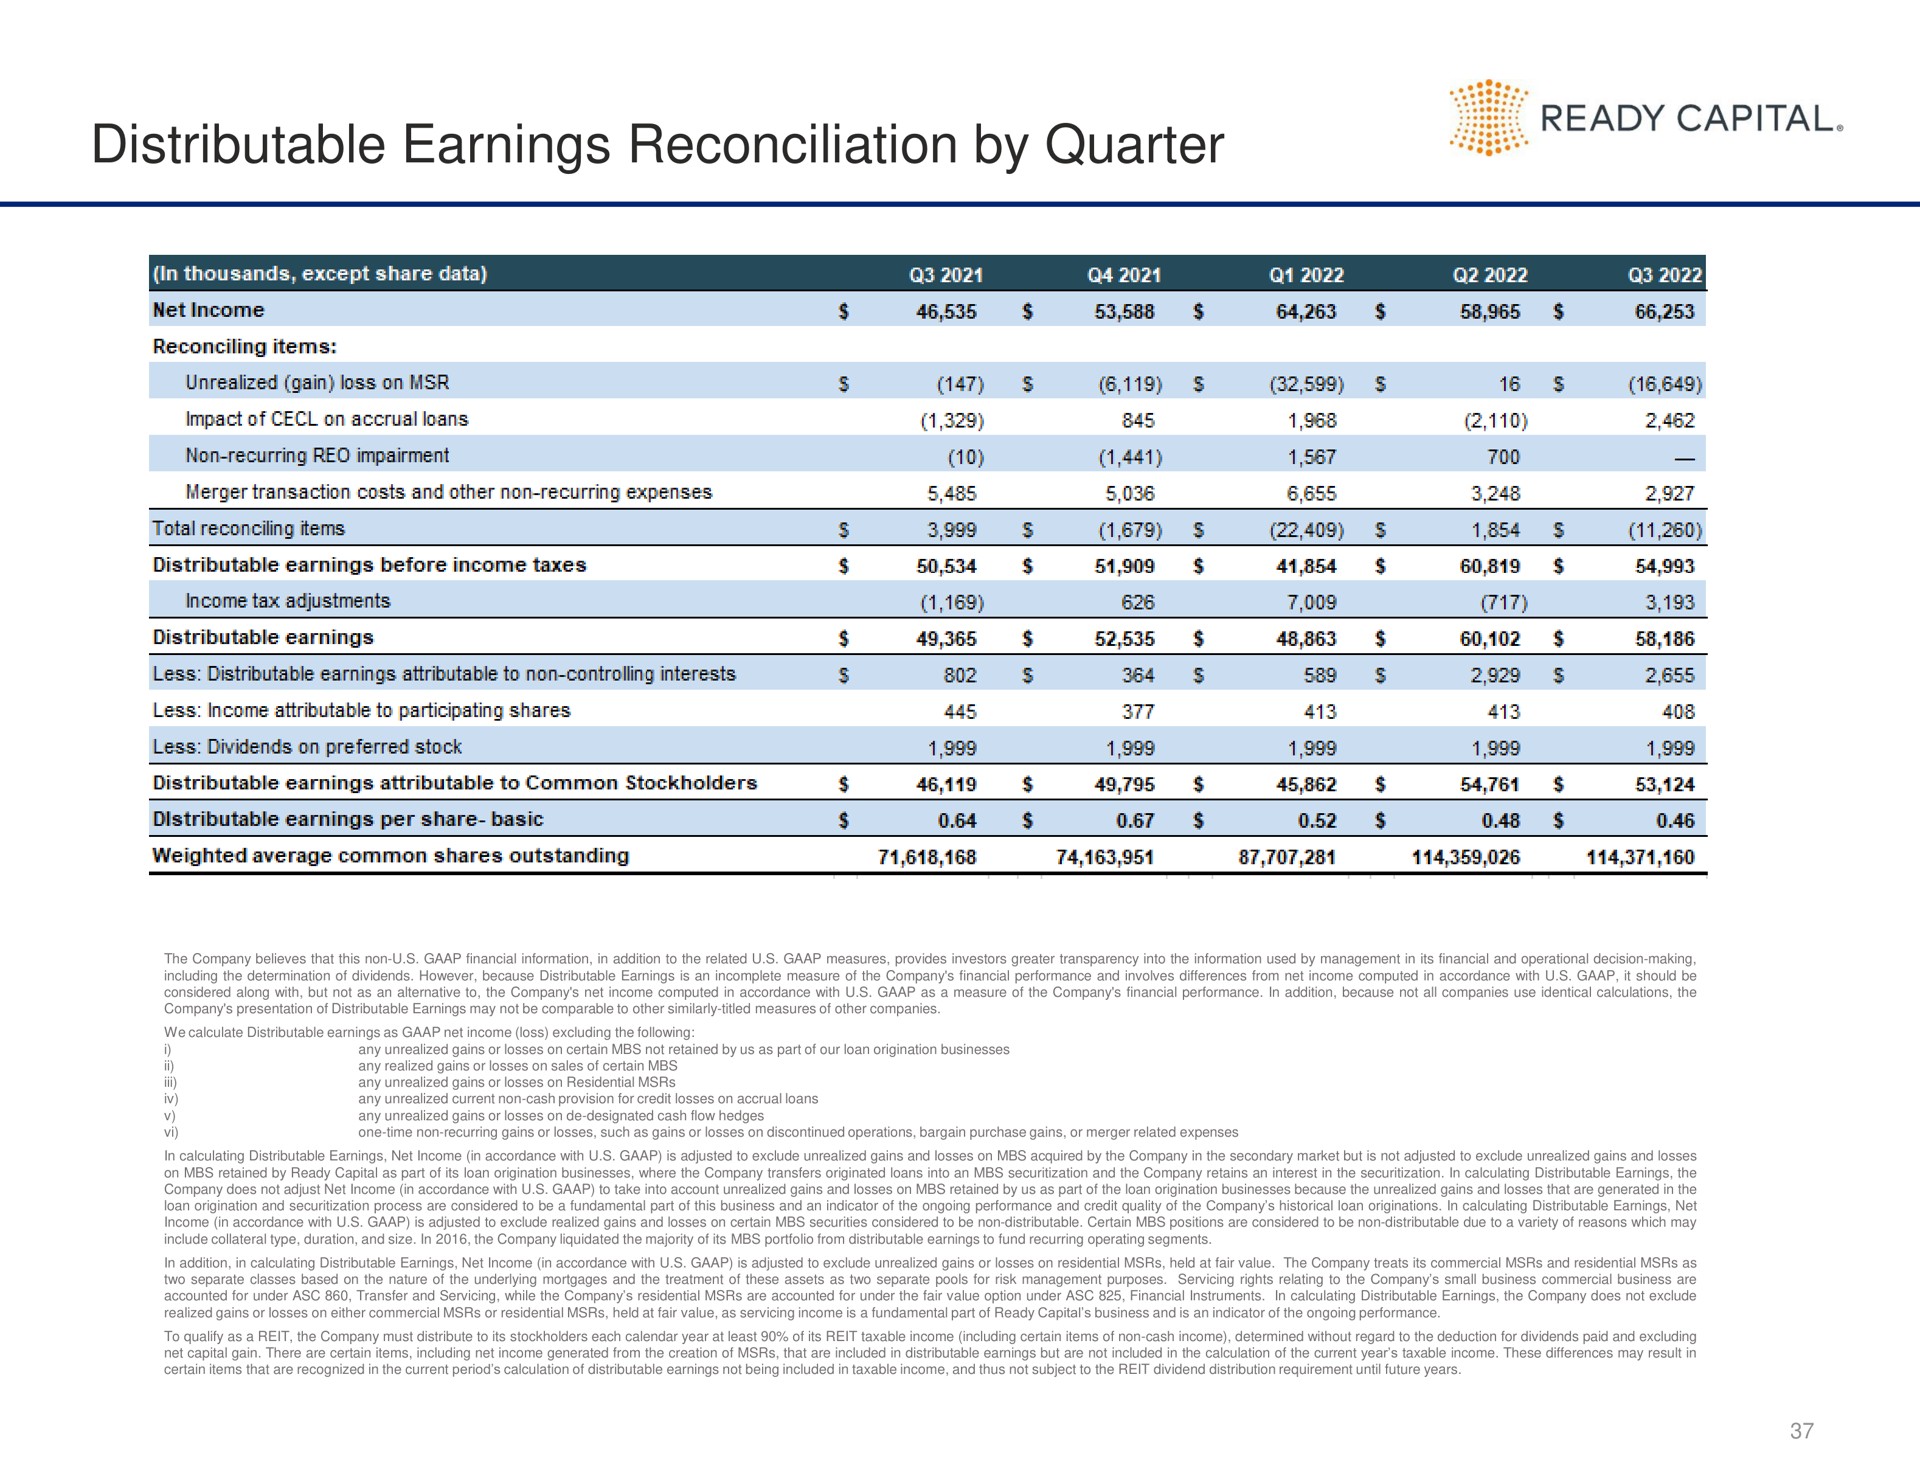 distributable earnings reconciliation by quarter | Ready Capital